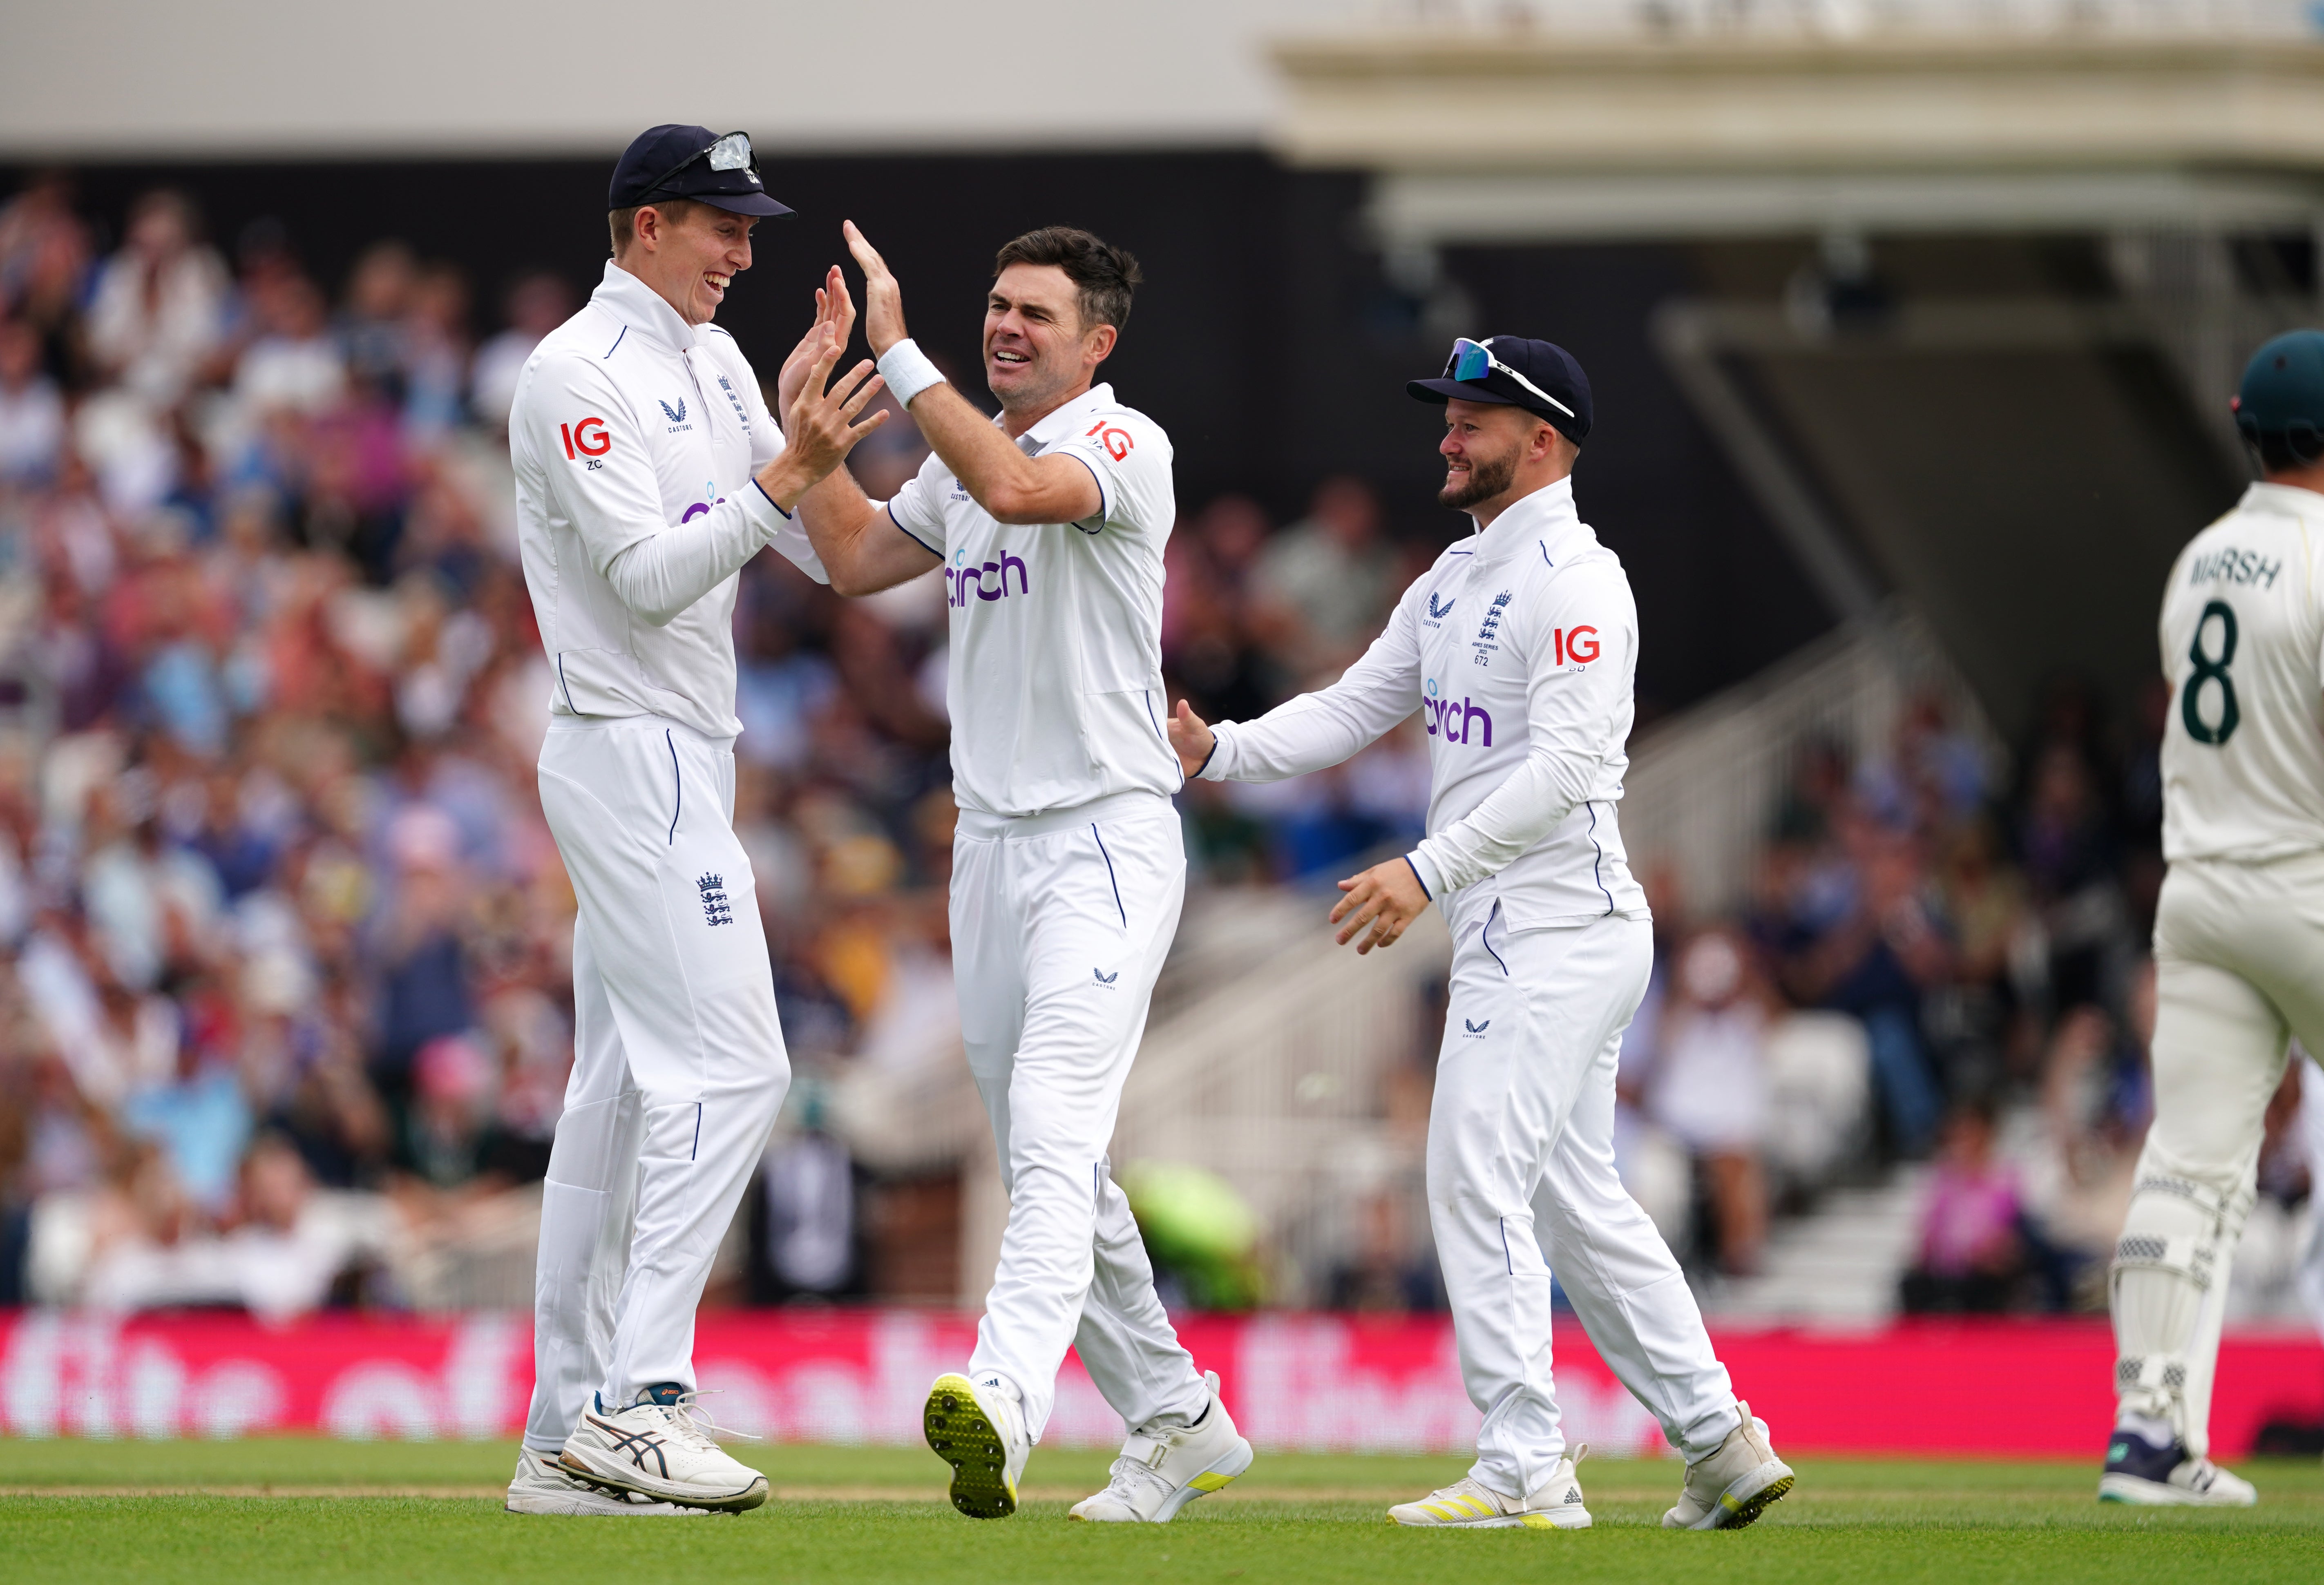 pa ready, james anderson, england, rob key, ben foakes, india, lord, matthew mott, west indies, english, jos buttler, lancashire, jonny bairstow, sri lanka, somerset, jack leach, shoaib bashir, surrey, brendon mccullum, australia, james anderson to stay with england in new role as fast bowling mentor